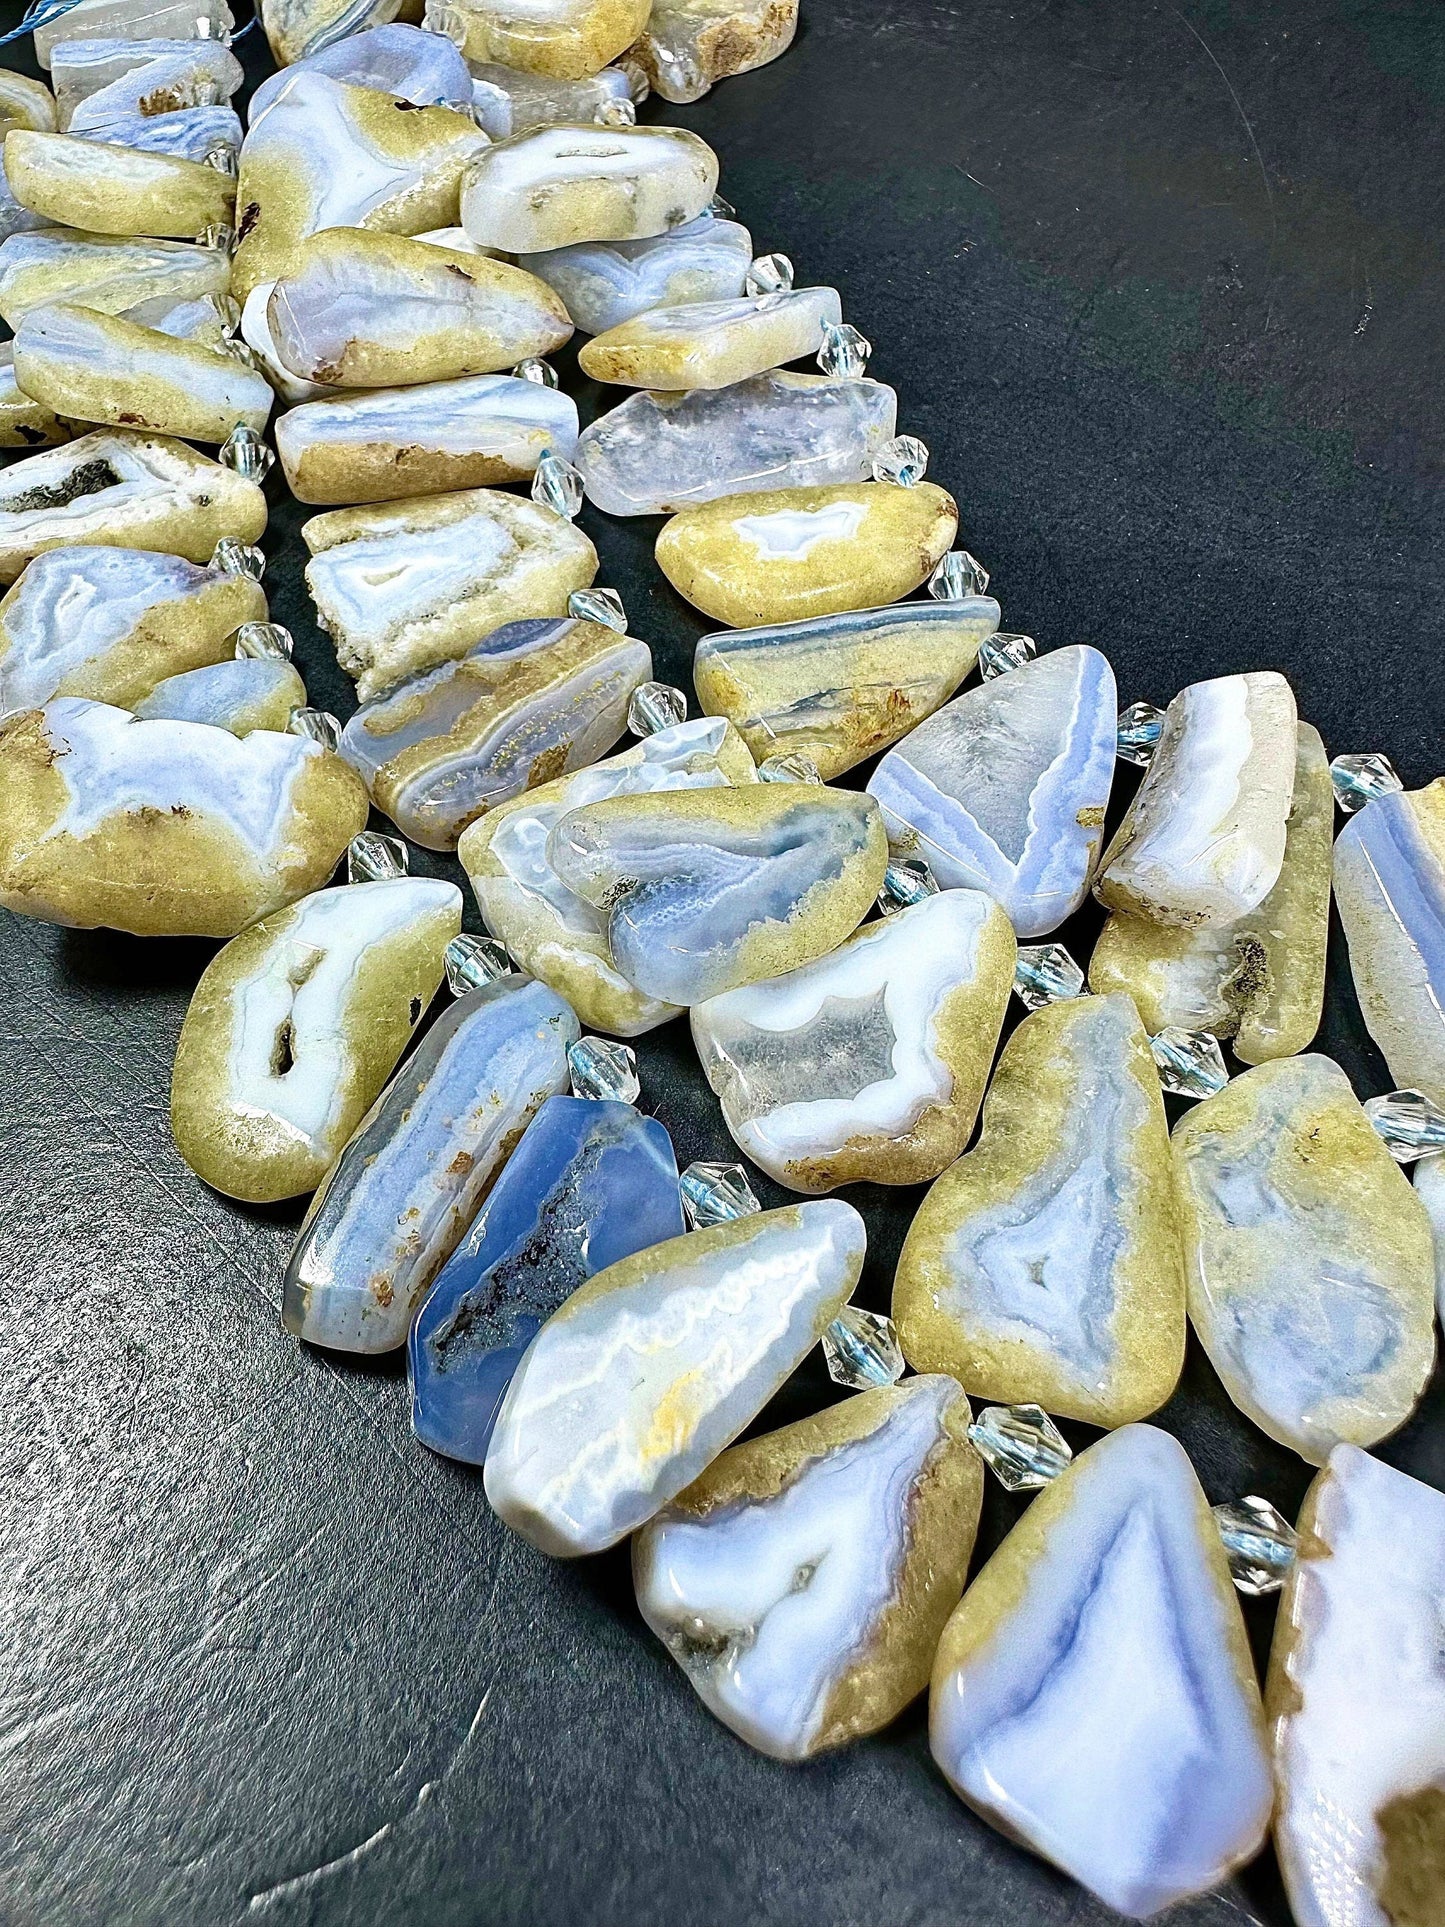 NATURAL Blue Lace Agate Gemstone 23x11 to 40x20mm Flat Freeform Shape Bead. Beautiful Blue White Color Loose Beads. Full Strand 15.5"